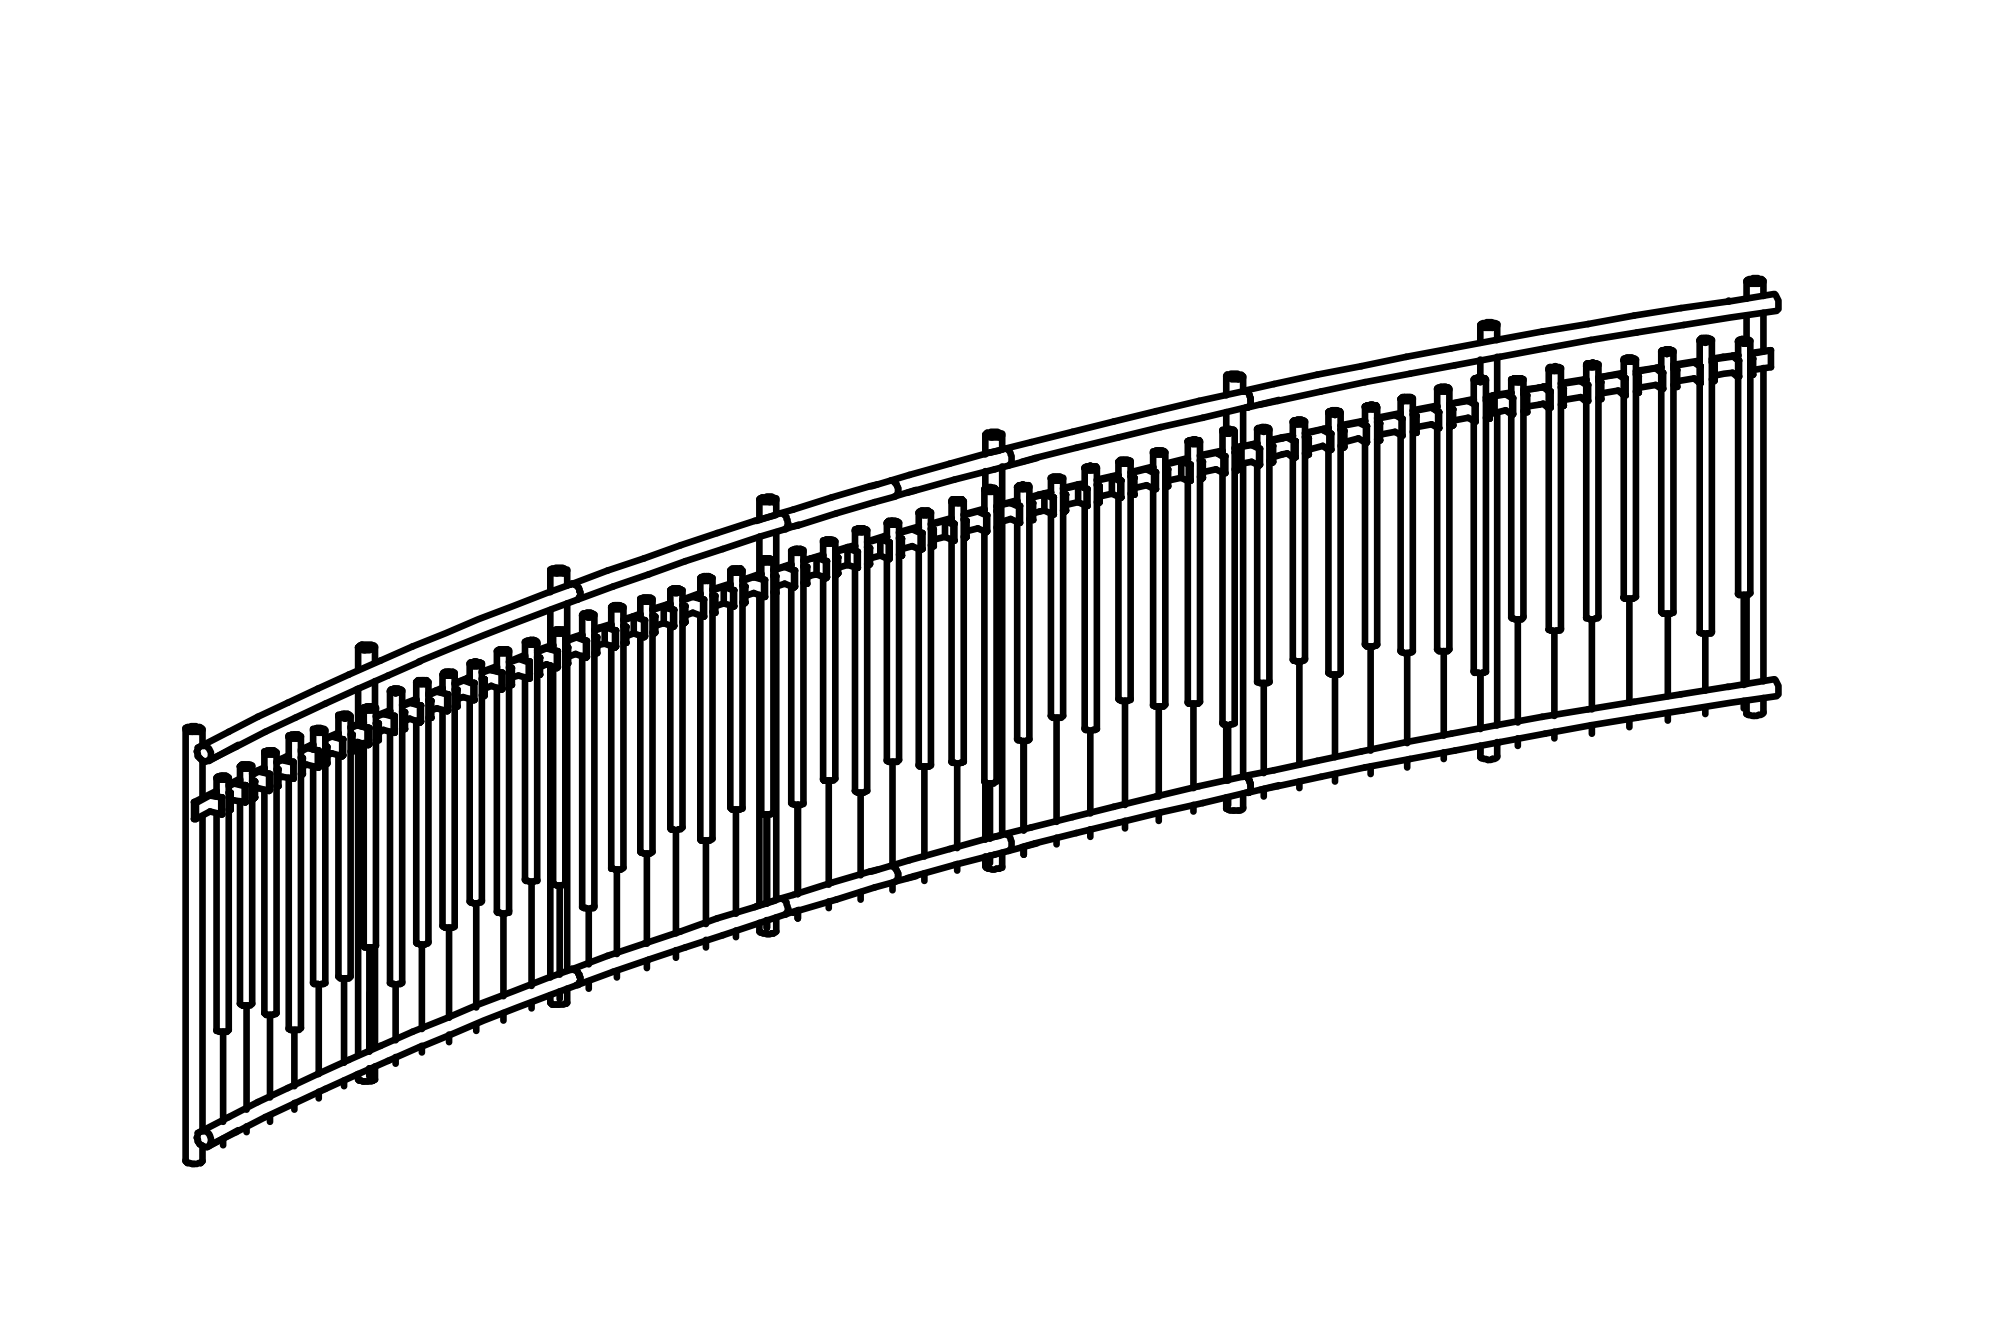 Melodic Fence with equipment made of stainless steel